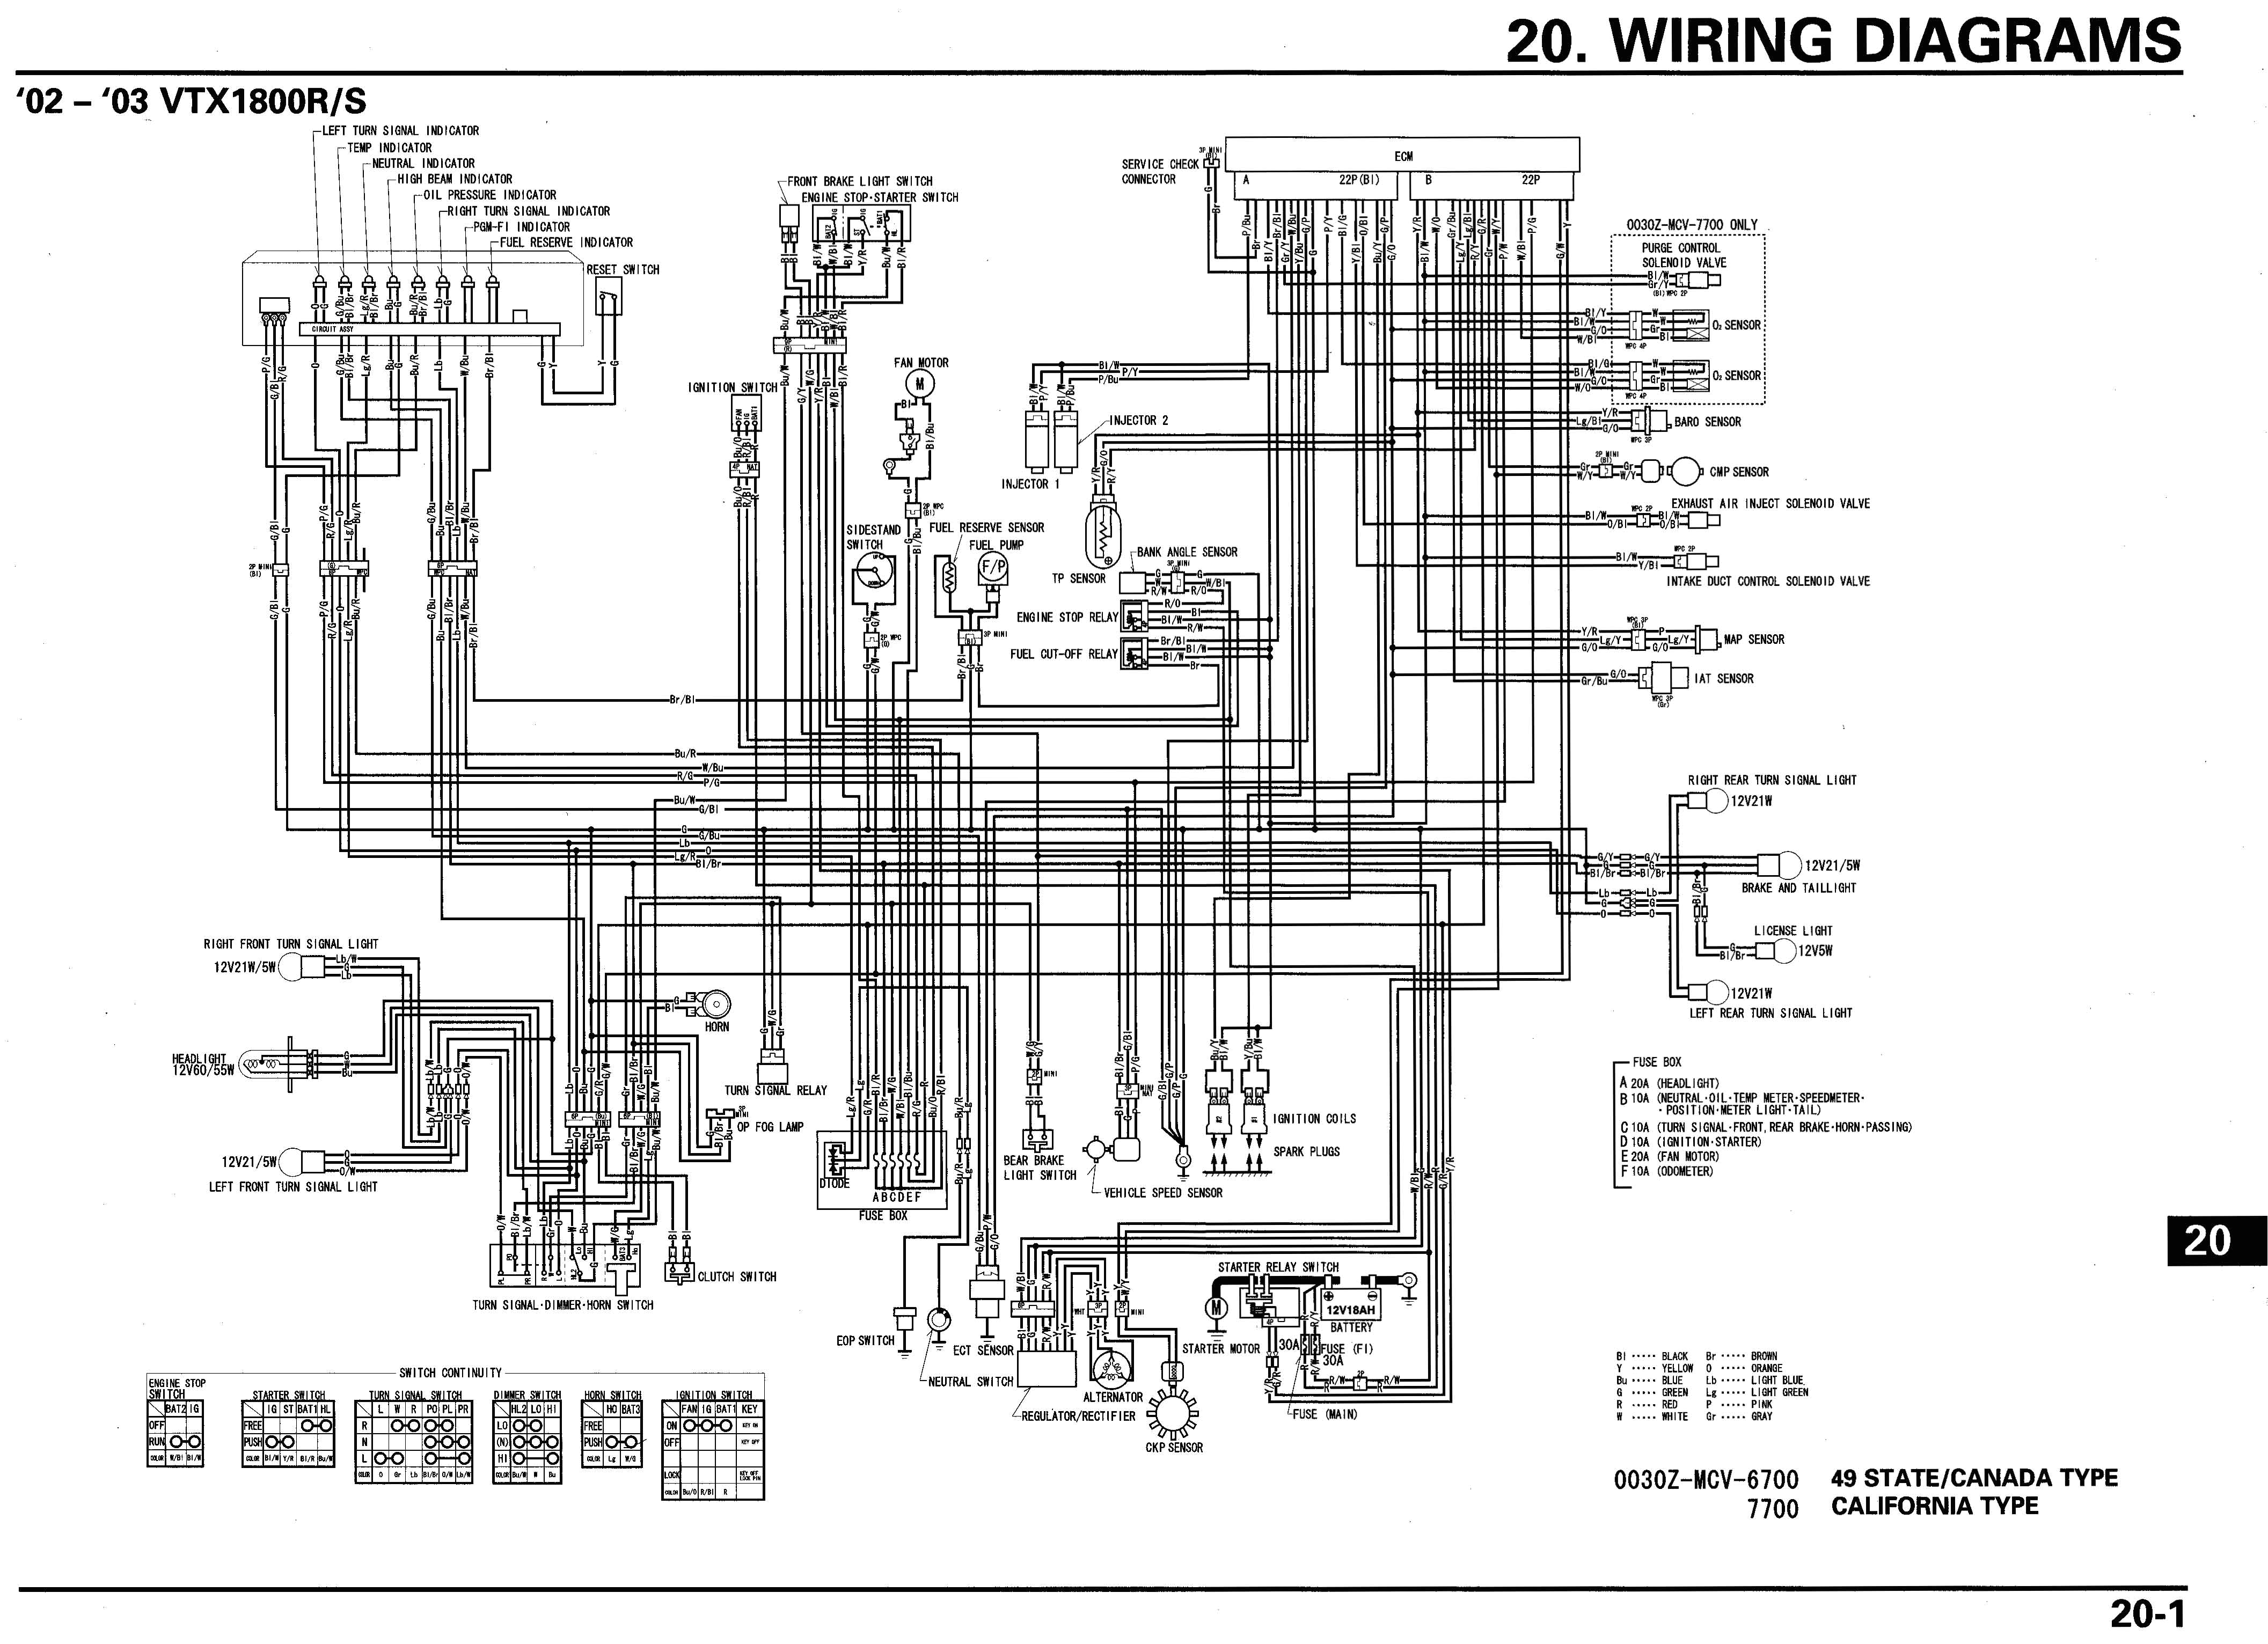 wiring diagram altec 6 04c experience of wiring diagram altec wiring diagrams altec wiring diagram